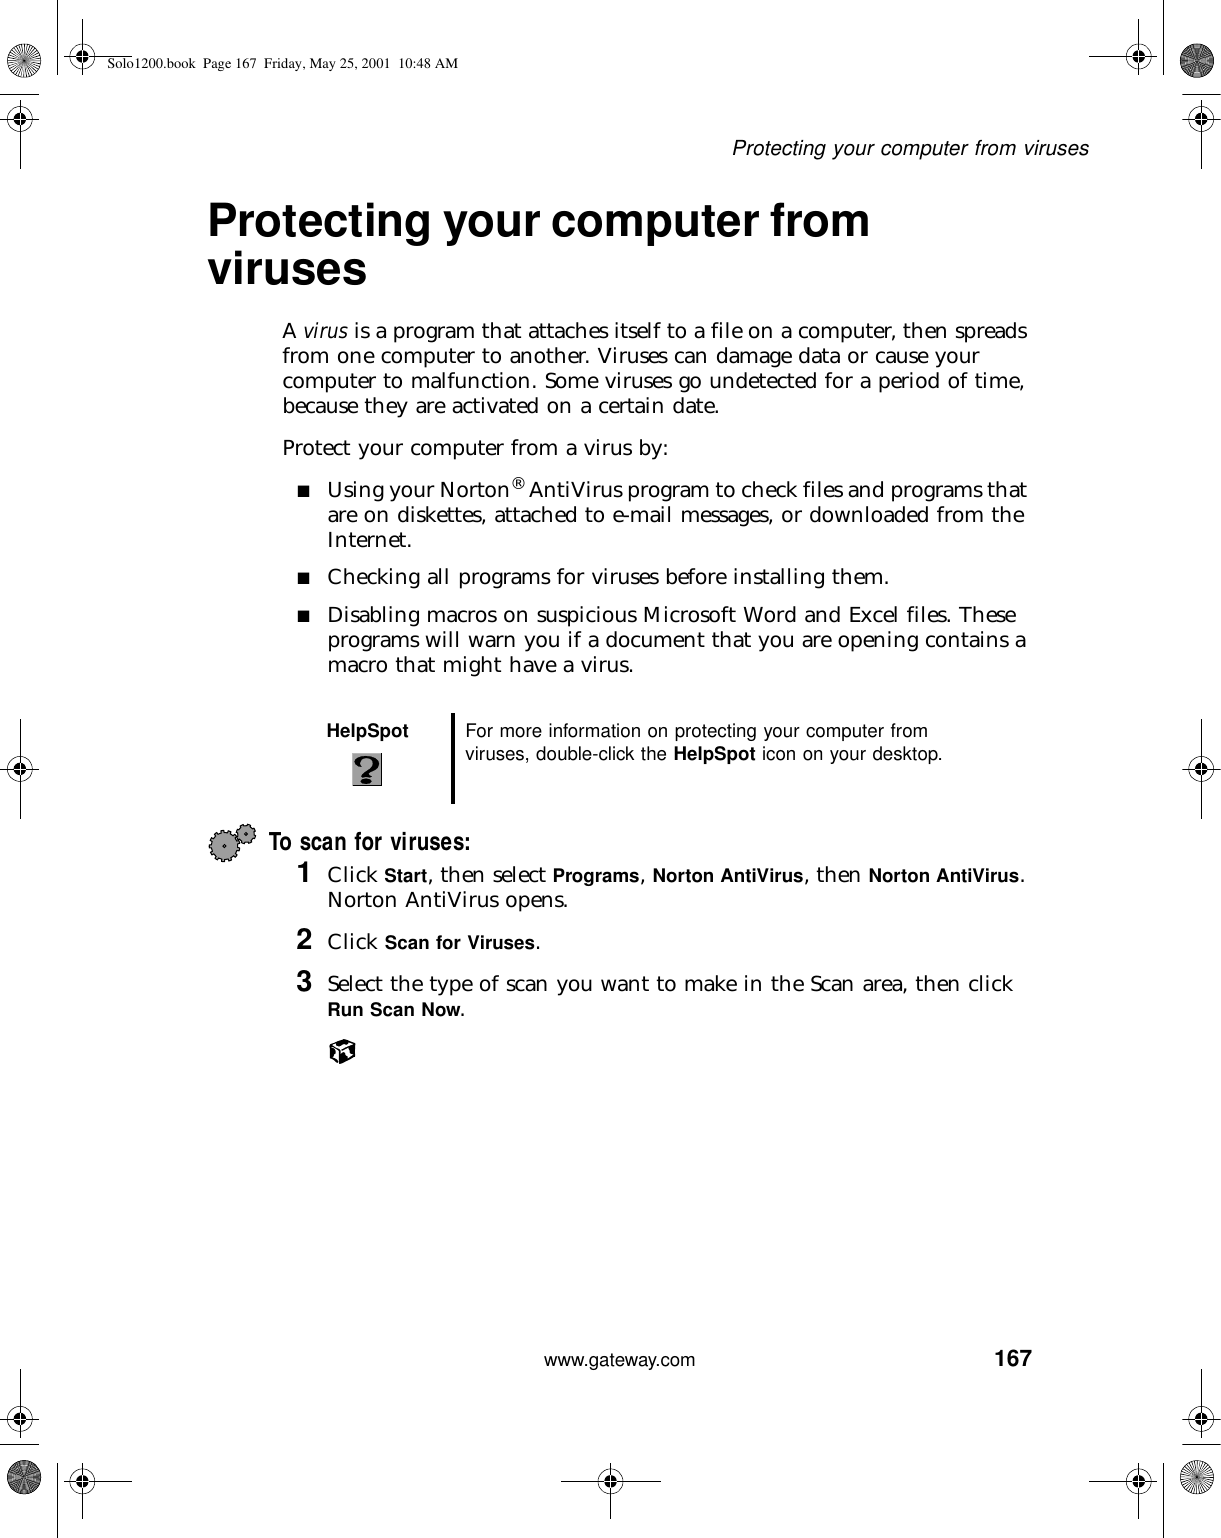 167Protecting your computer from viruseswww.gateway.comProtecting your computer from virusesA virus is a program that attaches itself to a file on a computer, then spreads from one computer to another. Viruses can damage data or cause your computer to malfunction. Some viruses go undetected for a period of time, because they are activated on a certain date.Protect your computer from a virus by:■Using your Norton® AntiVirus program to check files and programs that are on diskettes, attached to e-mail messages, or downloaded from the Internet.■Checking all programs for viruses before installing them.■Disabling macros on suspicious Microsoft Word and Excel files. These programs will warn you if a document that you are opening contains a macro that might have a virus.To scan for viruses: 1Click Start, then select Programs, Norton AntiVirus, then Norton AntiVirus. Norton AntiVirus opens.2Click Scan for Viruses.3Select the type of scan you want to make in the Scan area, then click Run Scan Now.HelpSpot For more information on protecting your computer from viruses, double-click the HelpSpot icon on your desktop.Solo1200.book Page 167 Friday, May 25, 2001 10:48 AM